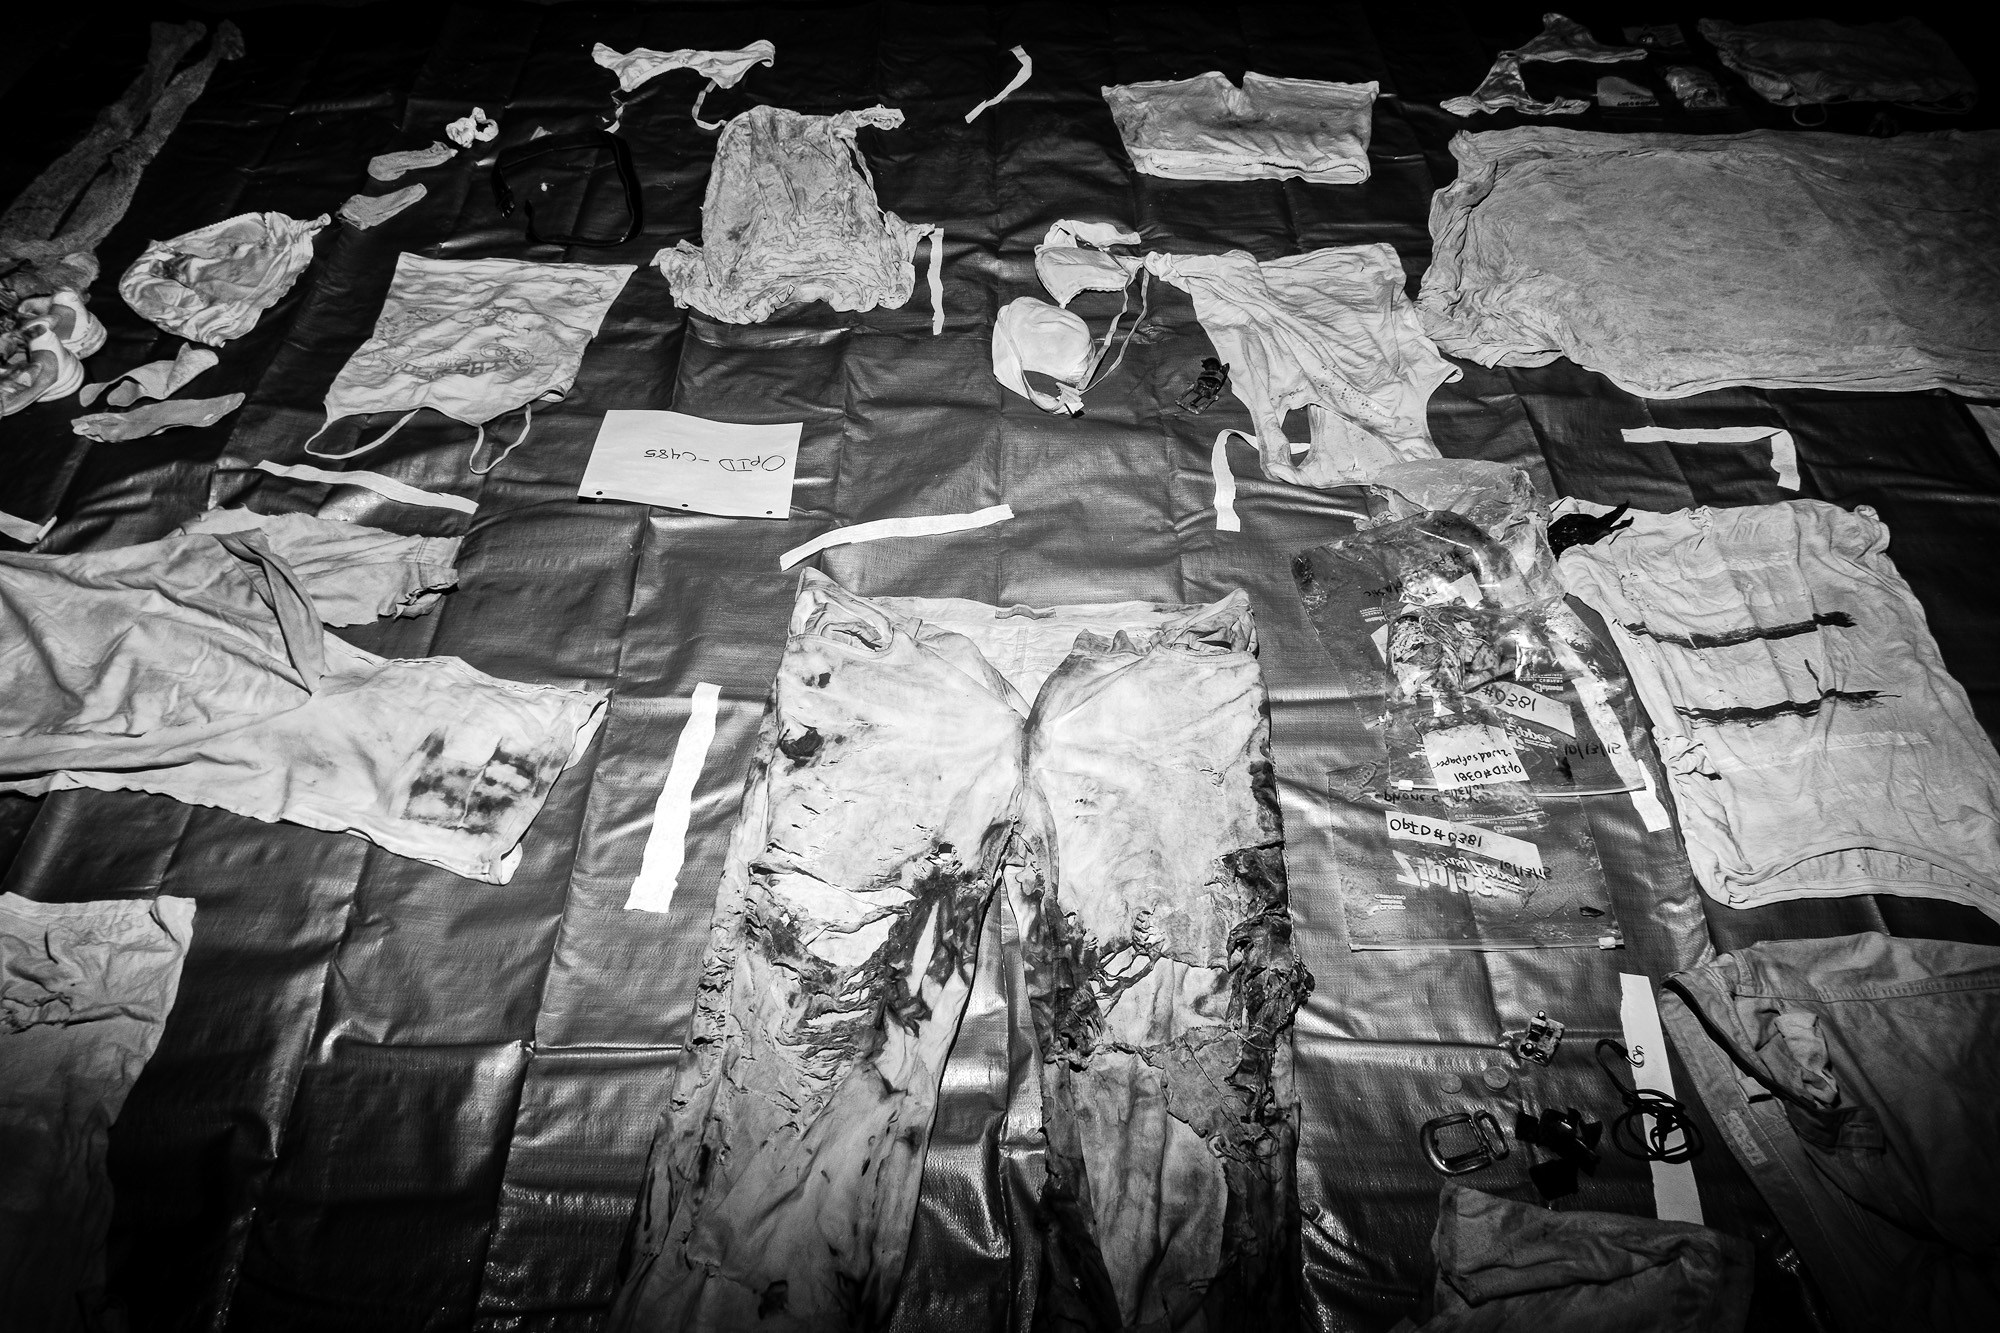 Clothing and personal effects recovered with the remains of unidentified suspected migrants dry on the floor of Texas State University’s Osteological Research and Processing Laboratory (ORPL) in San Marcos, Texas, January 14, 2016. These items will be cataloged and investigated as part of Operation Identification (OpID), an effort to identify and repatriate bodies recovered along migration routes near the US-Mexico border.